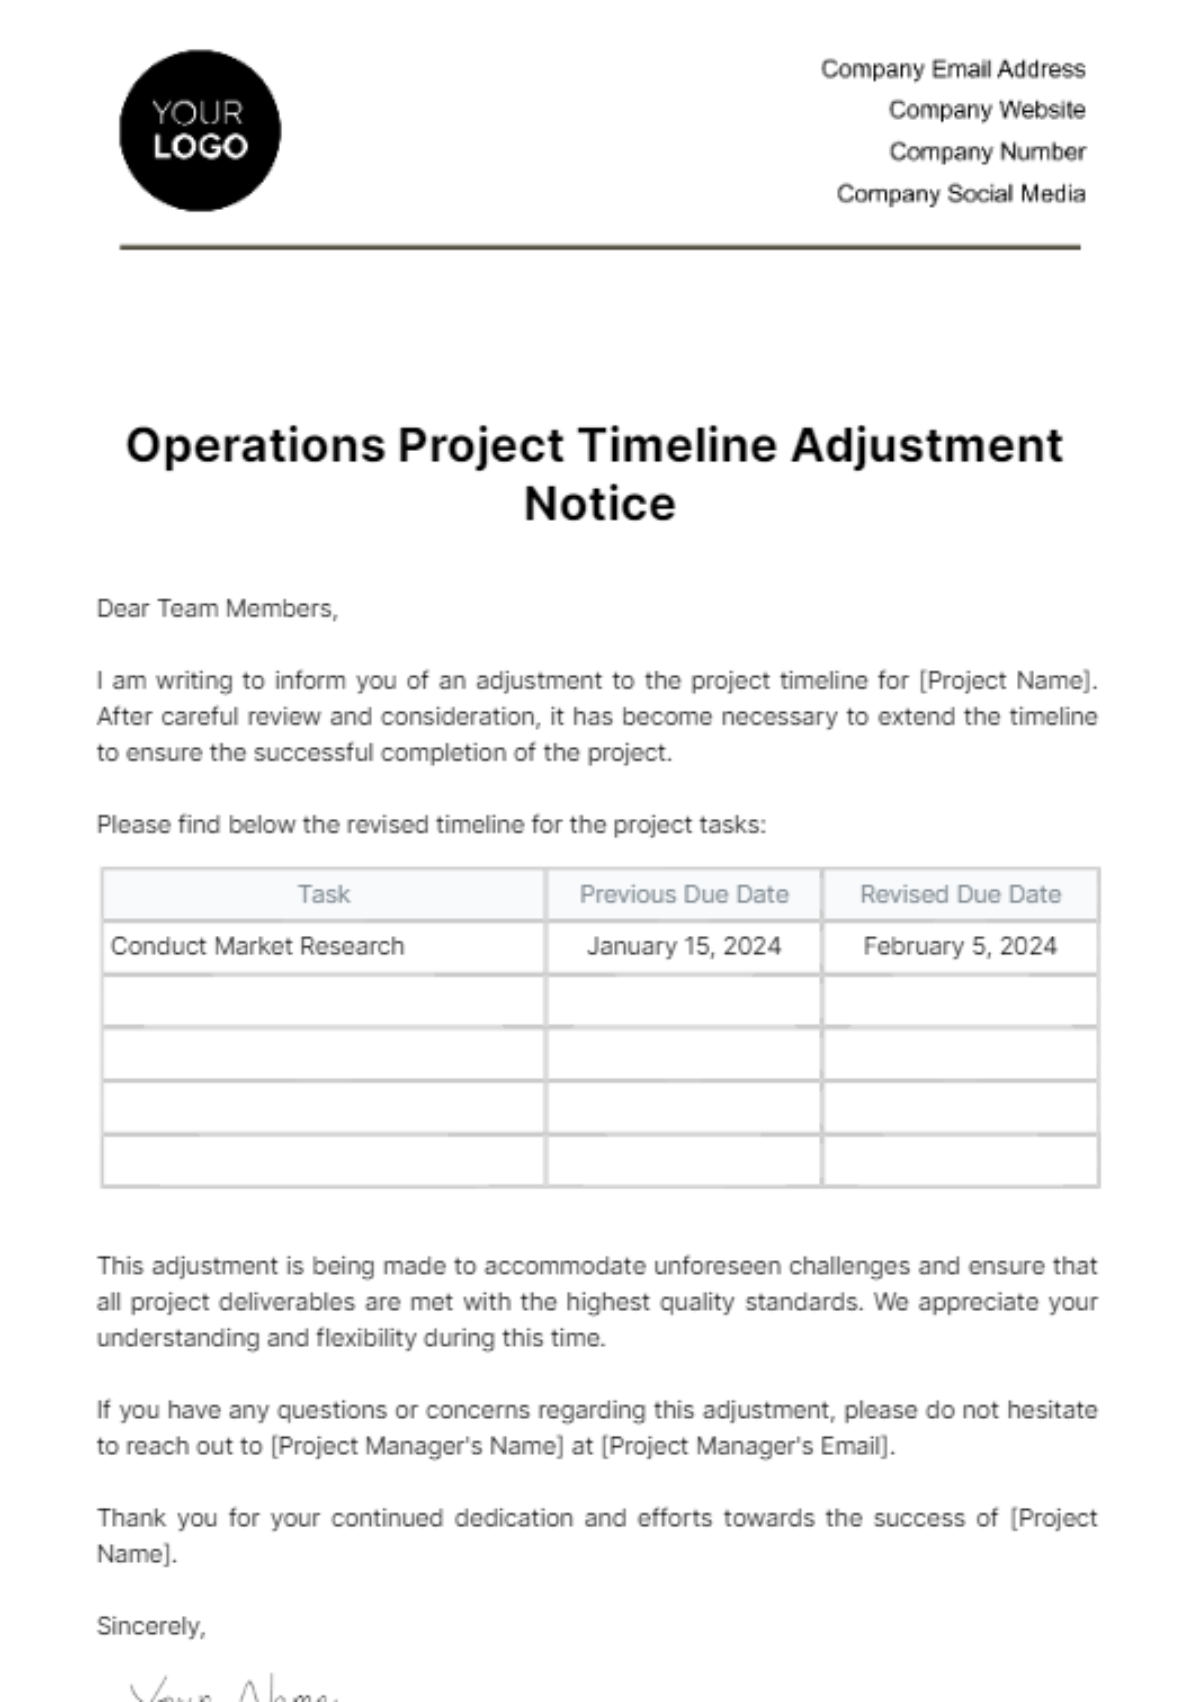 Free Operations Project Timeline Adjustment Notice Template